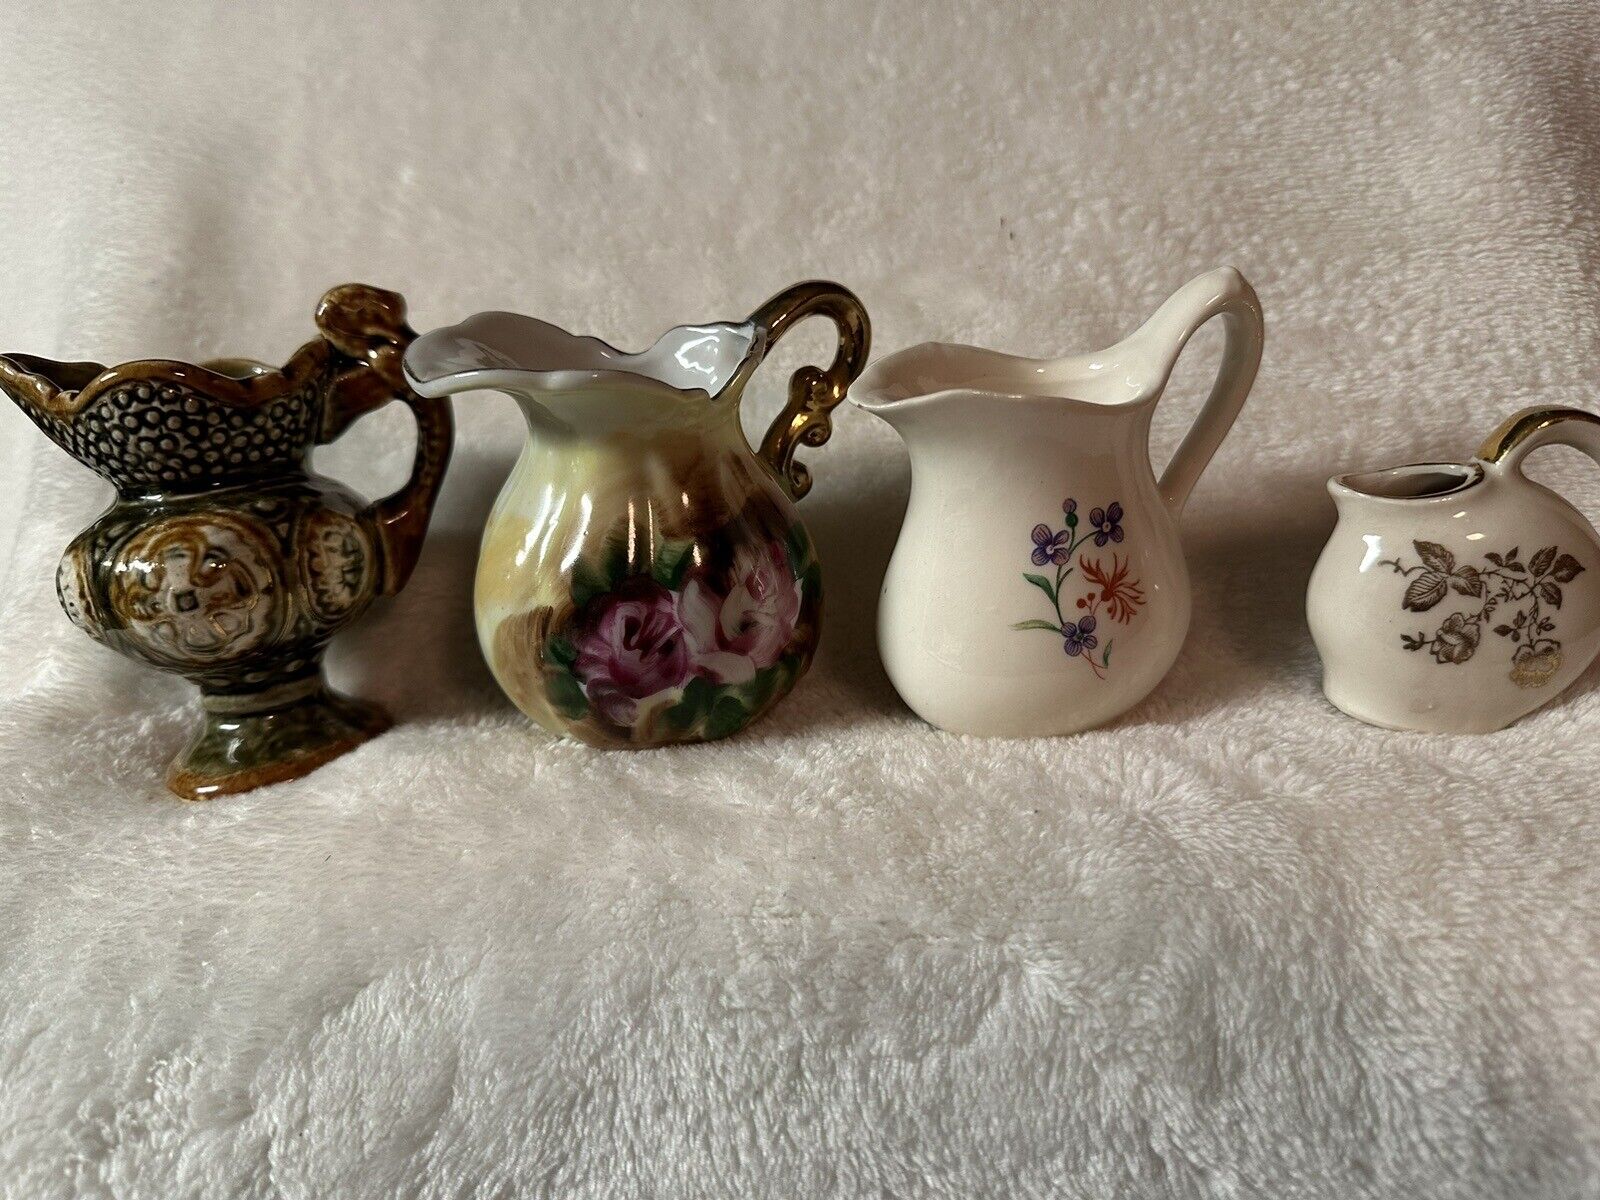 VTG Miniature Water Pitchers (Lot of 4)  GREAT DISPLAY ASSORTMENT